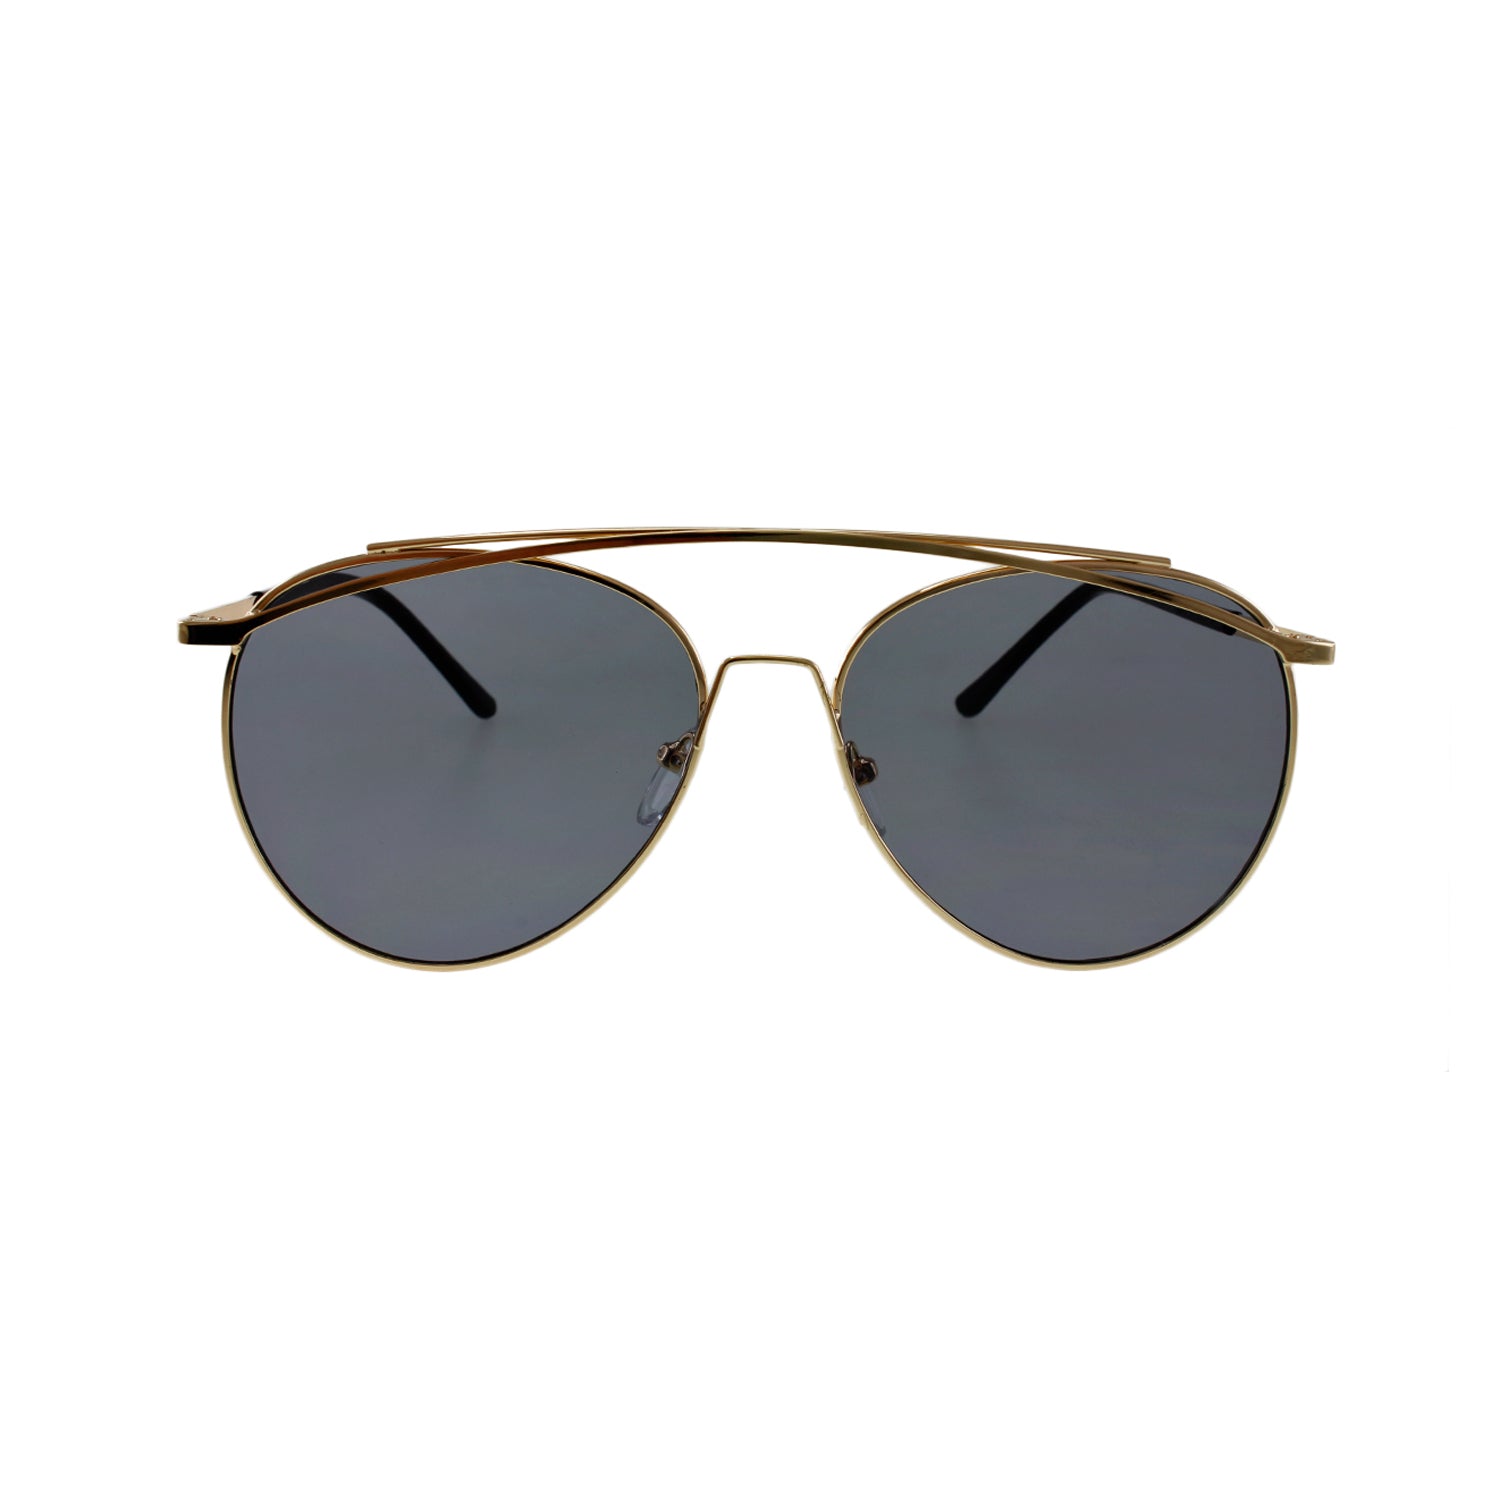 Jase New York Lincoln Sunglasses in Smoke - Shop Luxurious57